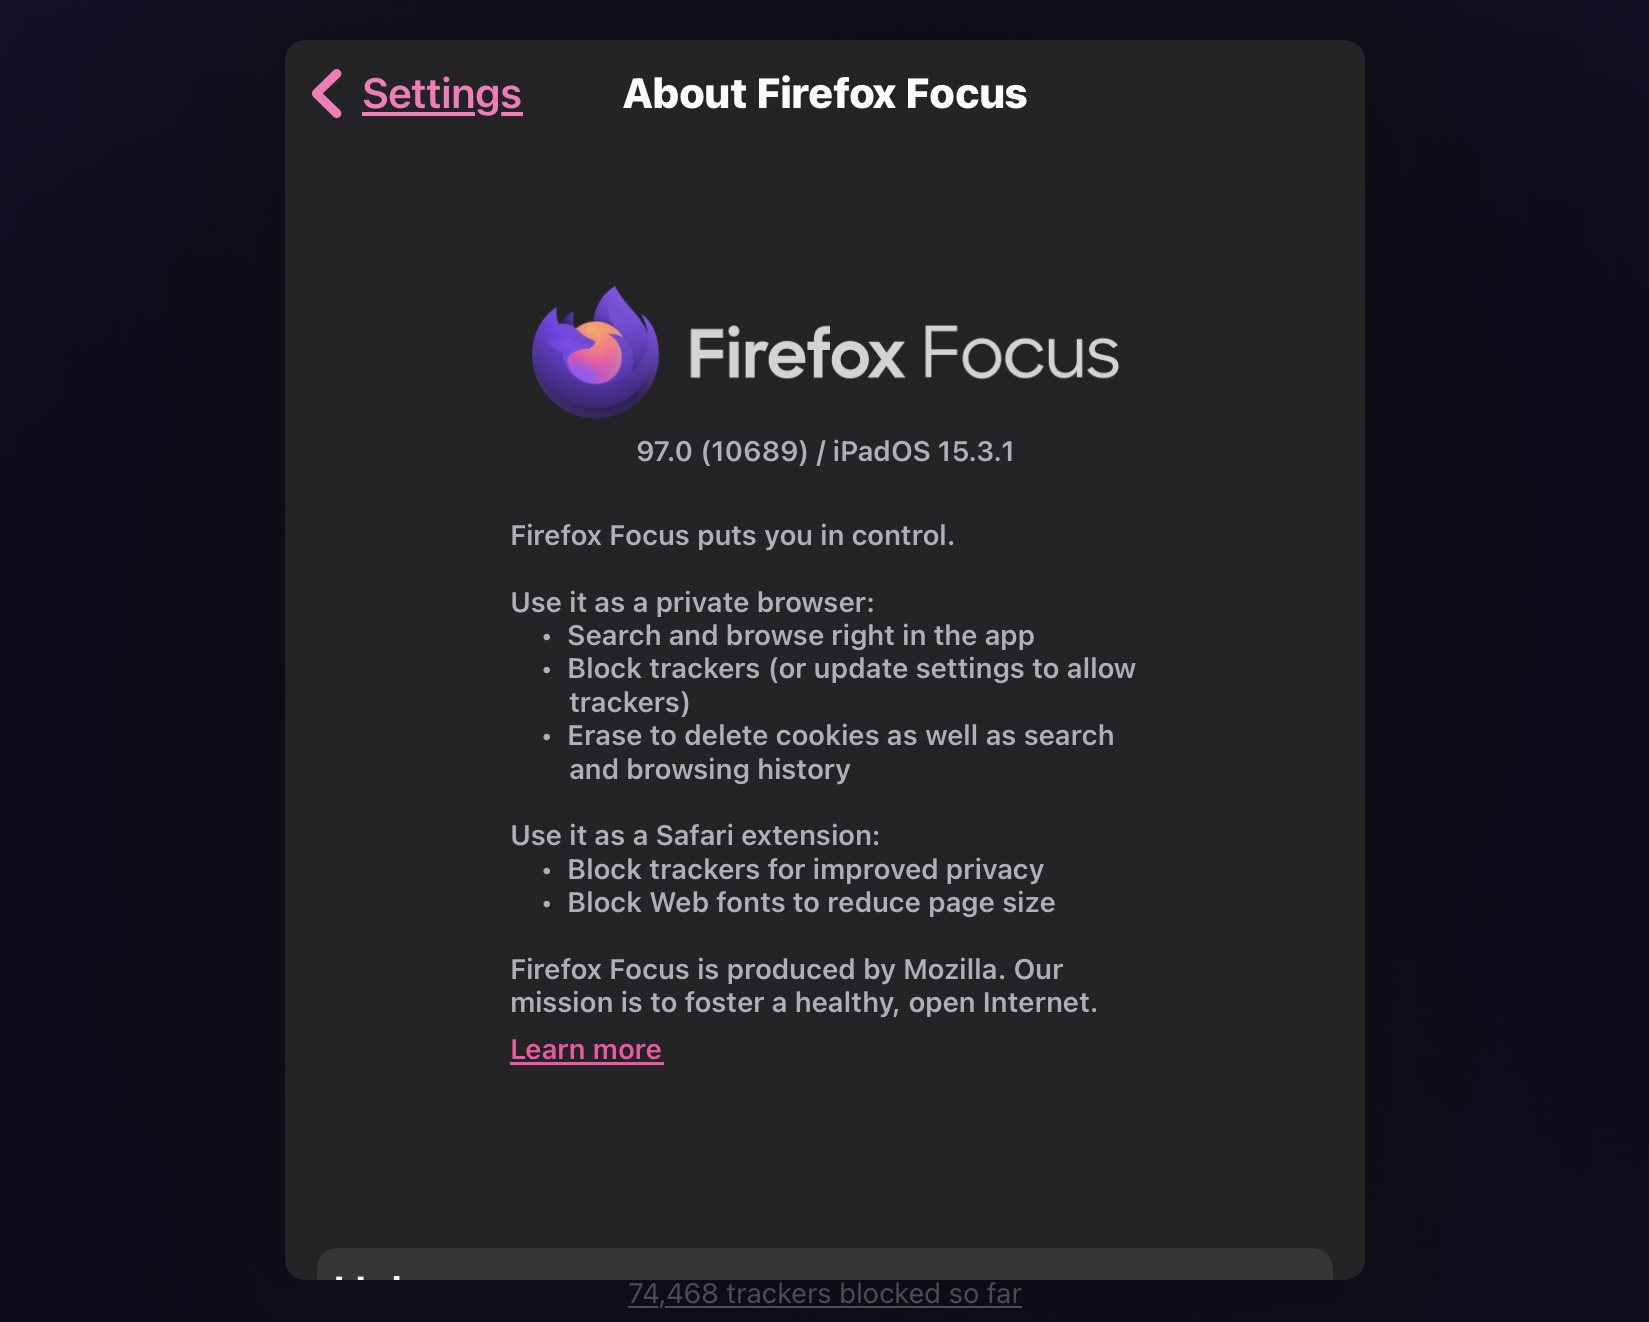 Get the Privacy You Expect in Firefox Focus by Disabling These Features